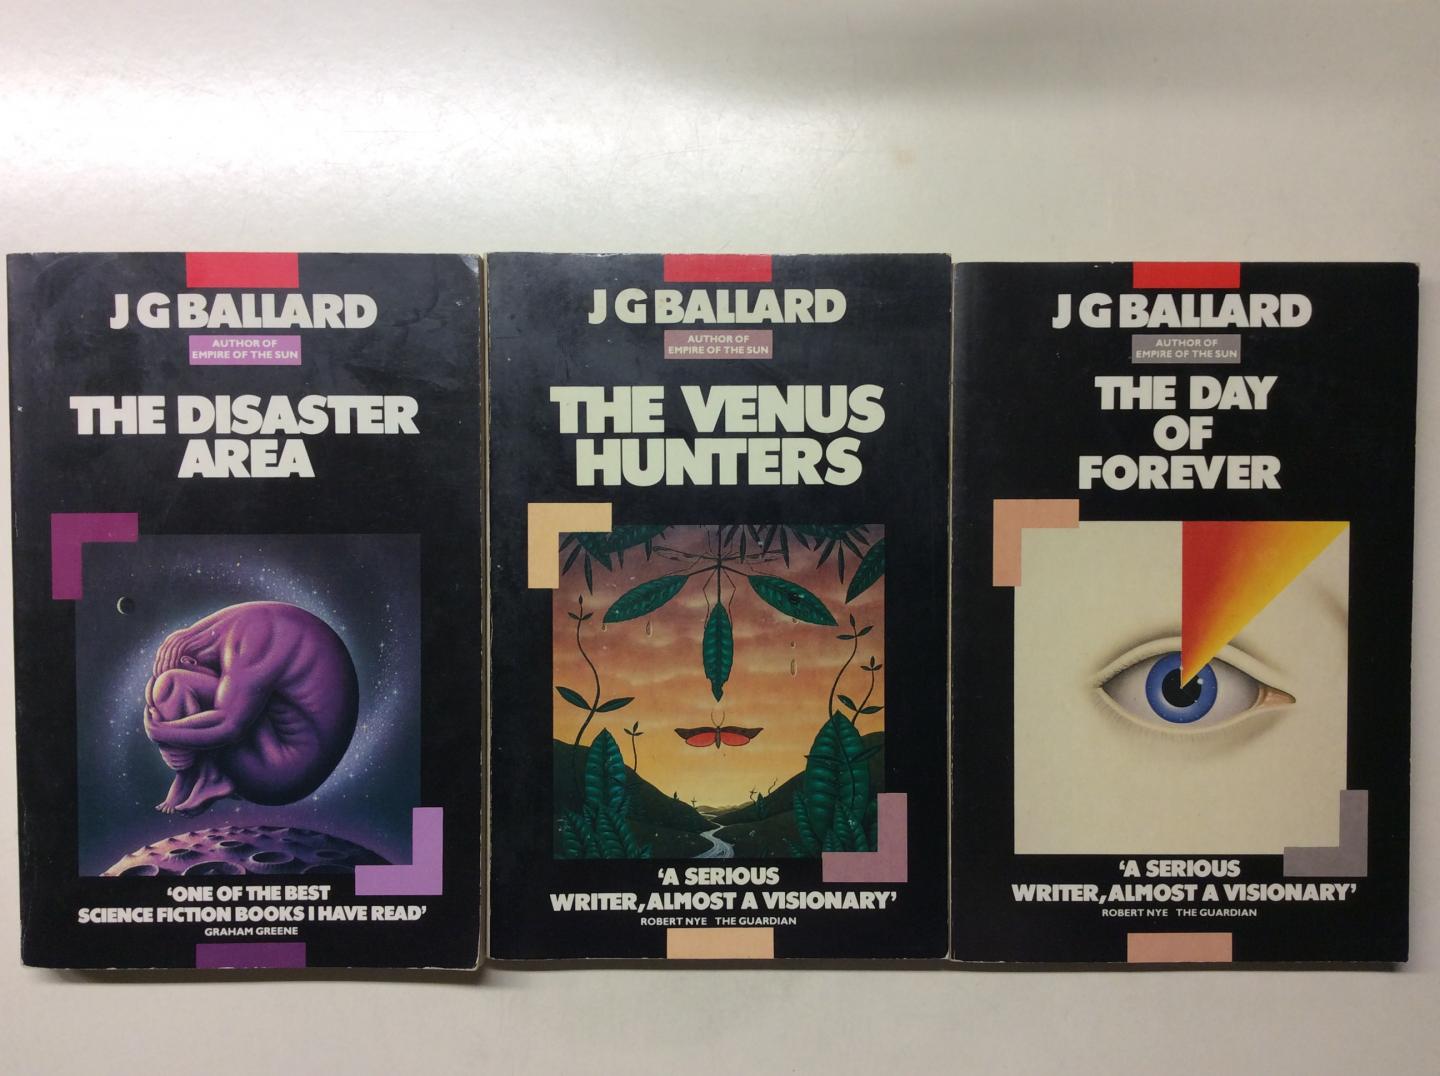 Ballard J.G. - 1) The Disaster Area; 2) The Venus Hunters; 3) The Day of Forever